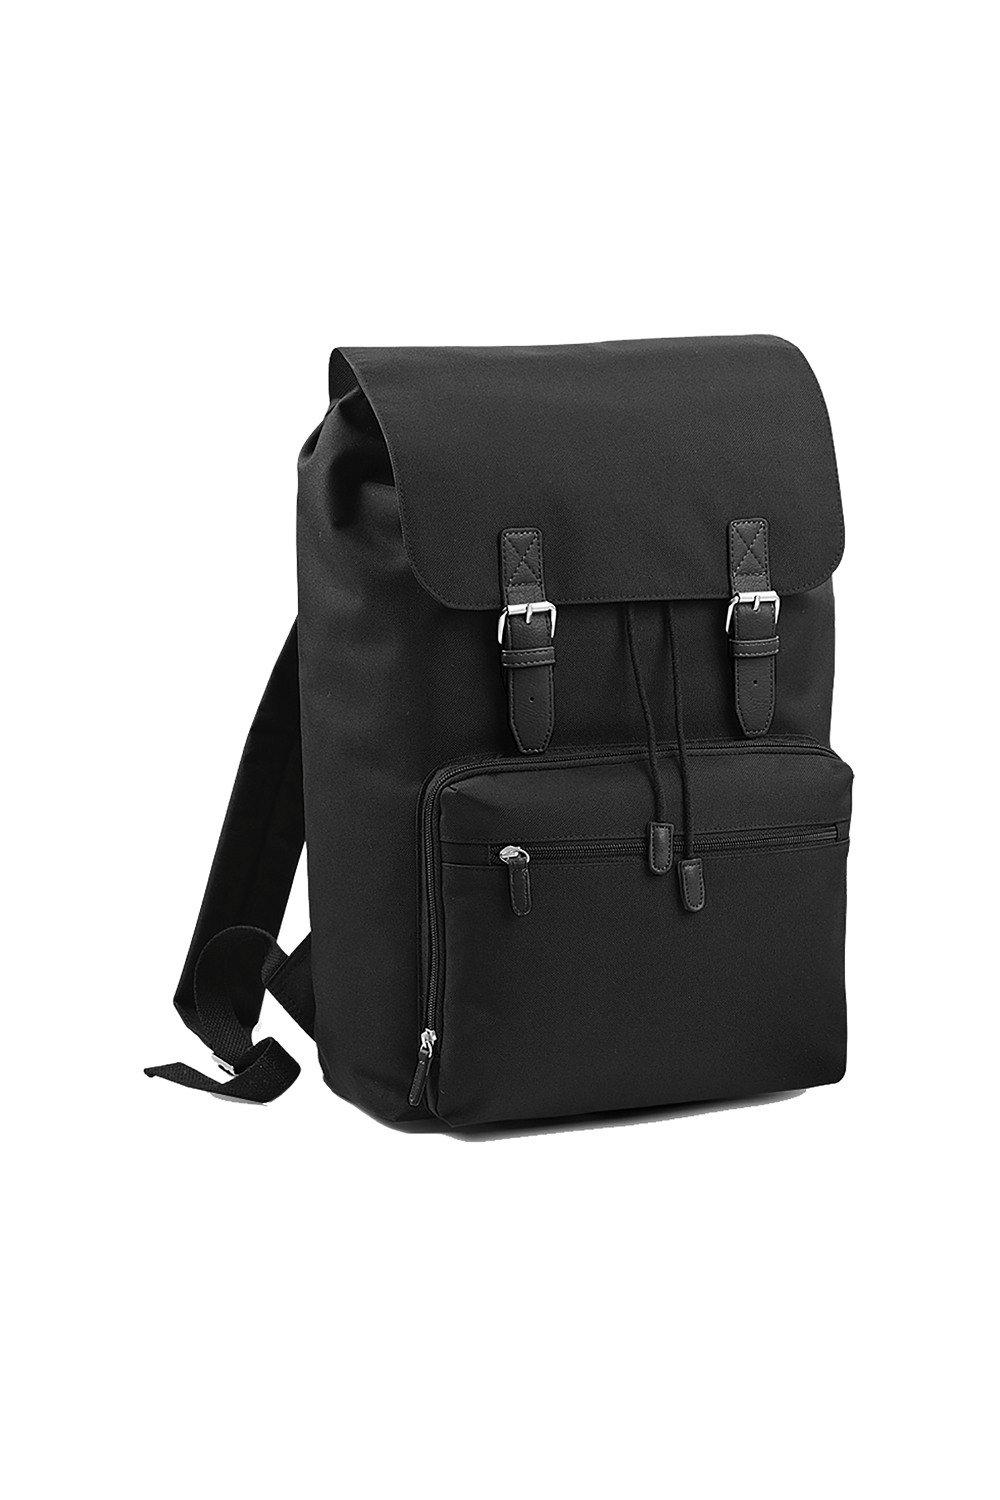 Heritage Laptop Backpack Bag (Up To 17inch Laptop)